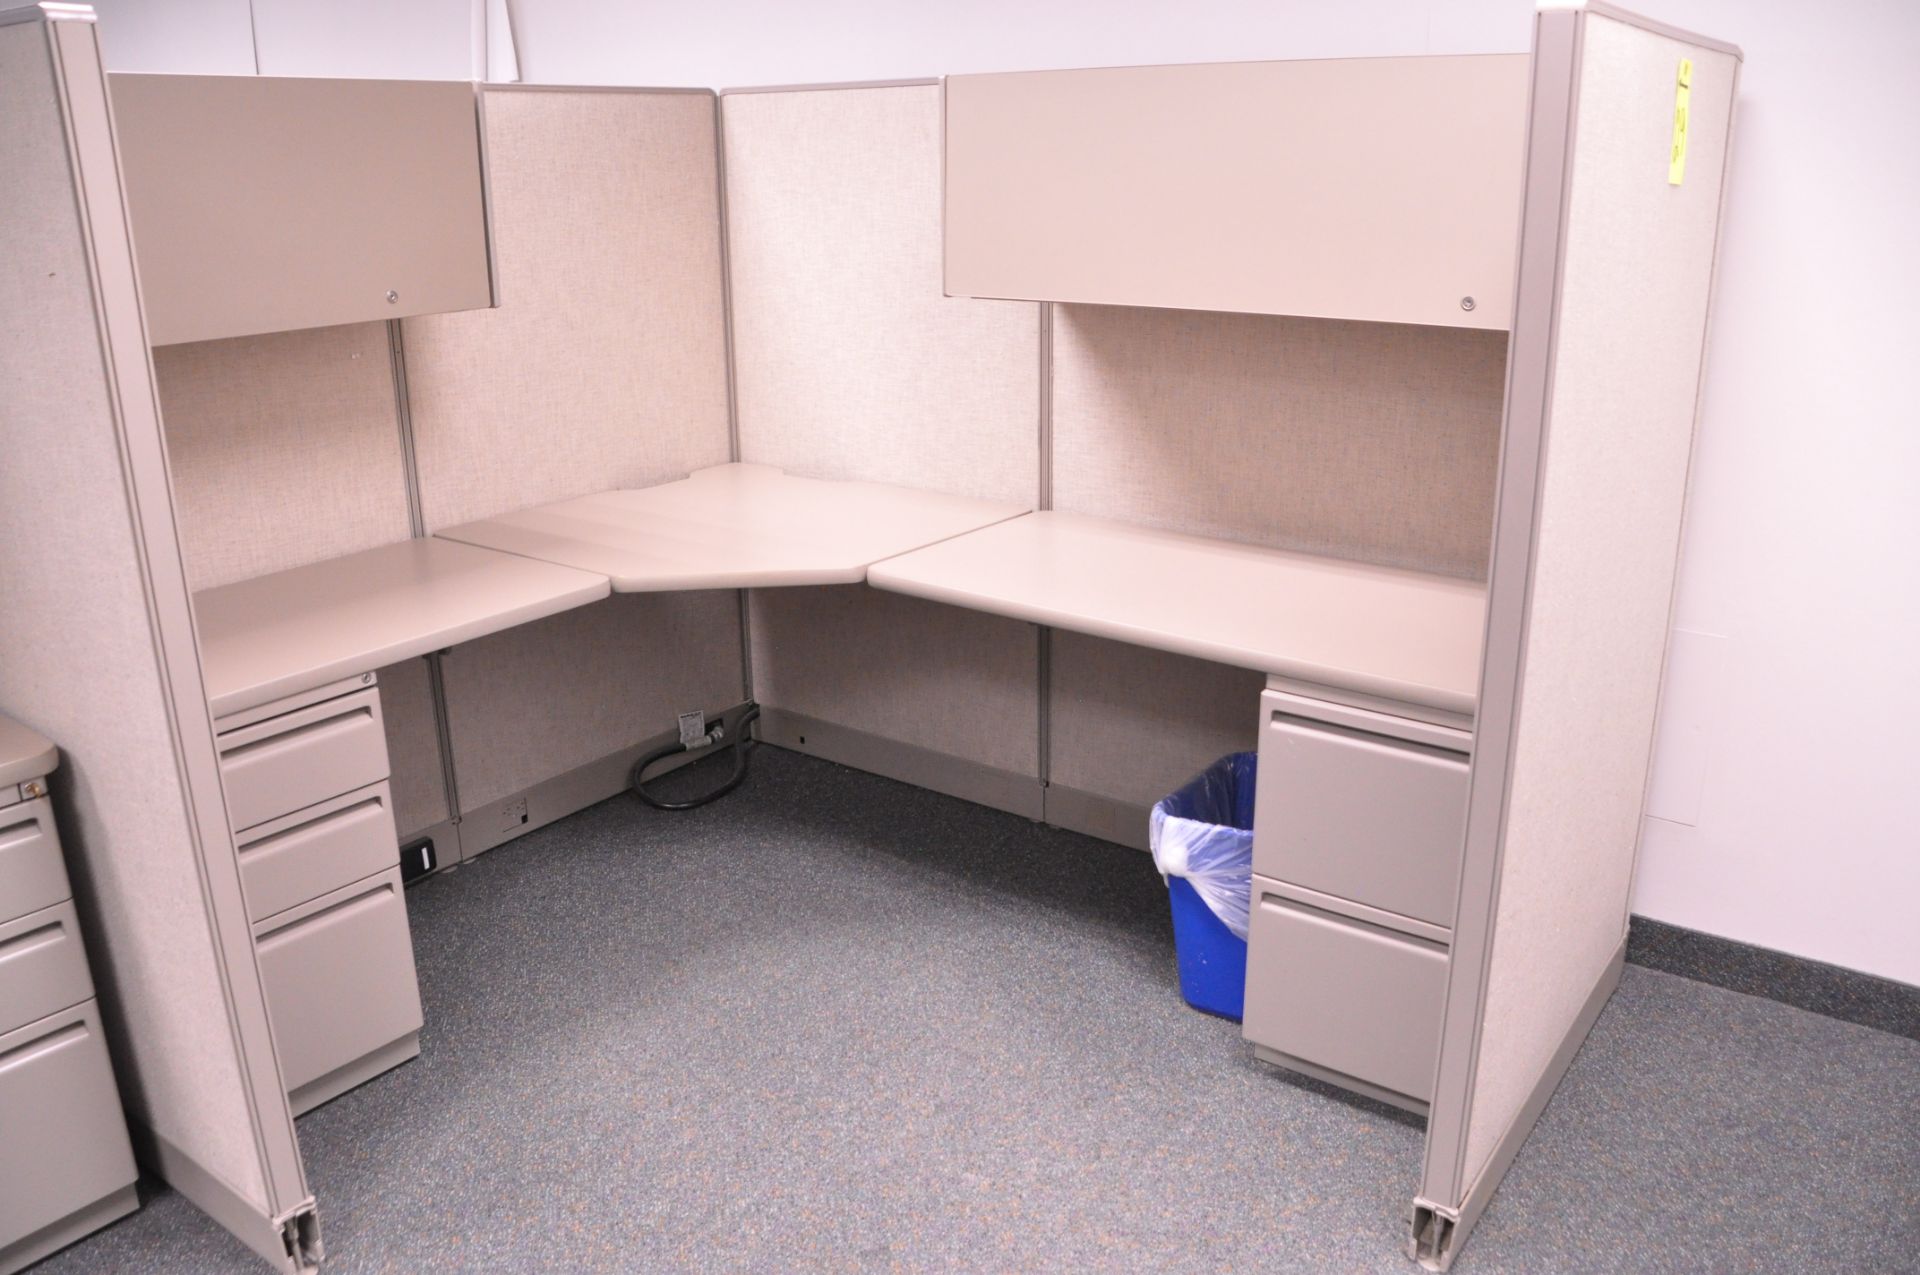 Lot-(1) 6-Station Cubicle Partition Work System with Overhead Cabinets, (No Chairs), (Located 2nd - Image 8 of 8